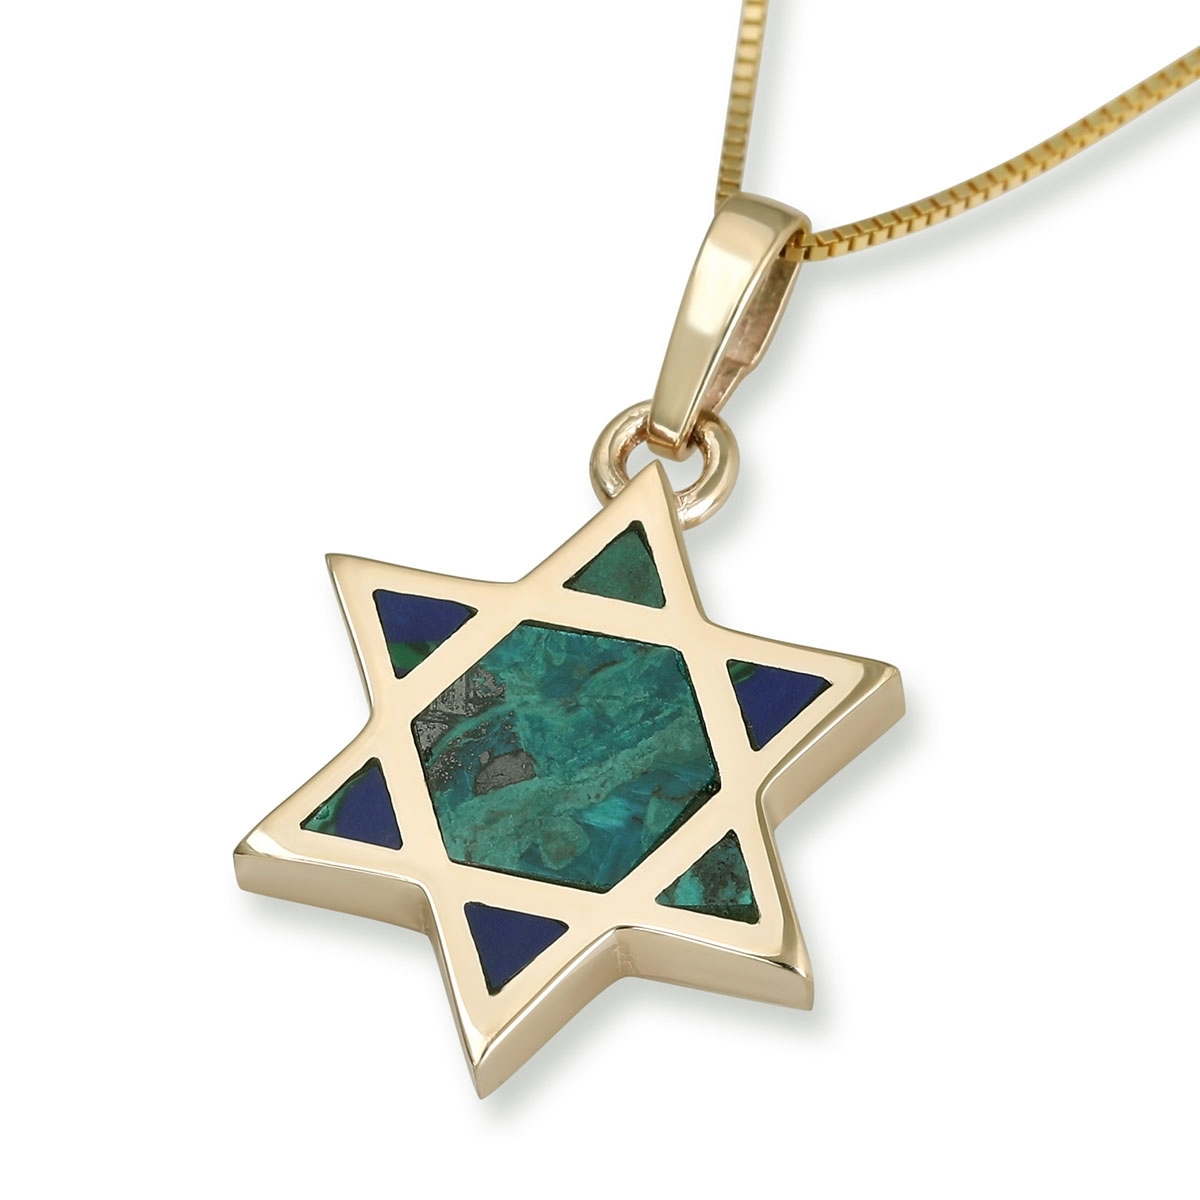 14K Yellow Gold and Eilat Stone Star of David Pendant Necklace - 1